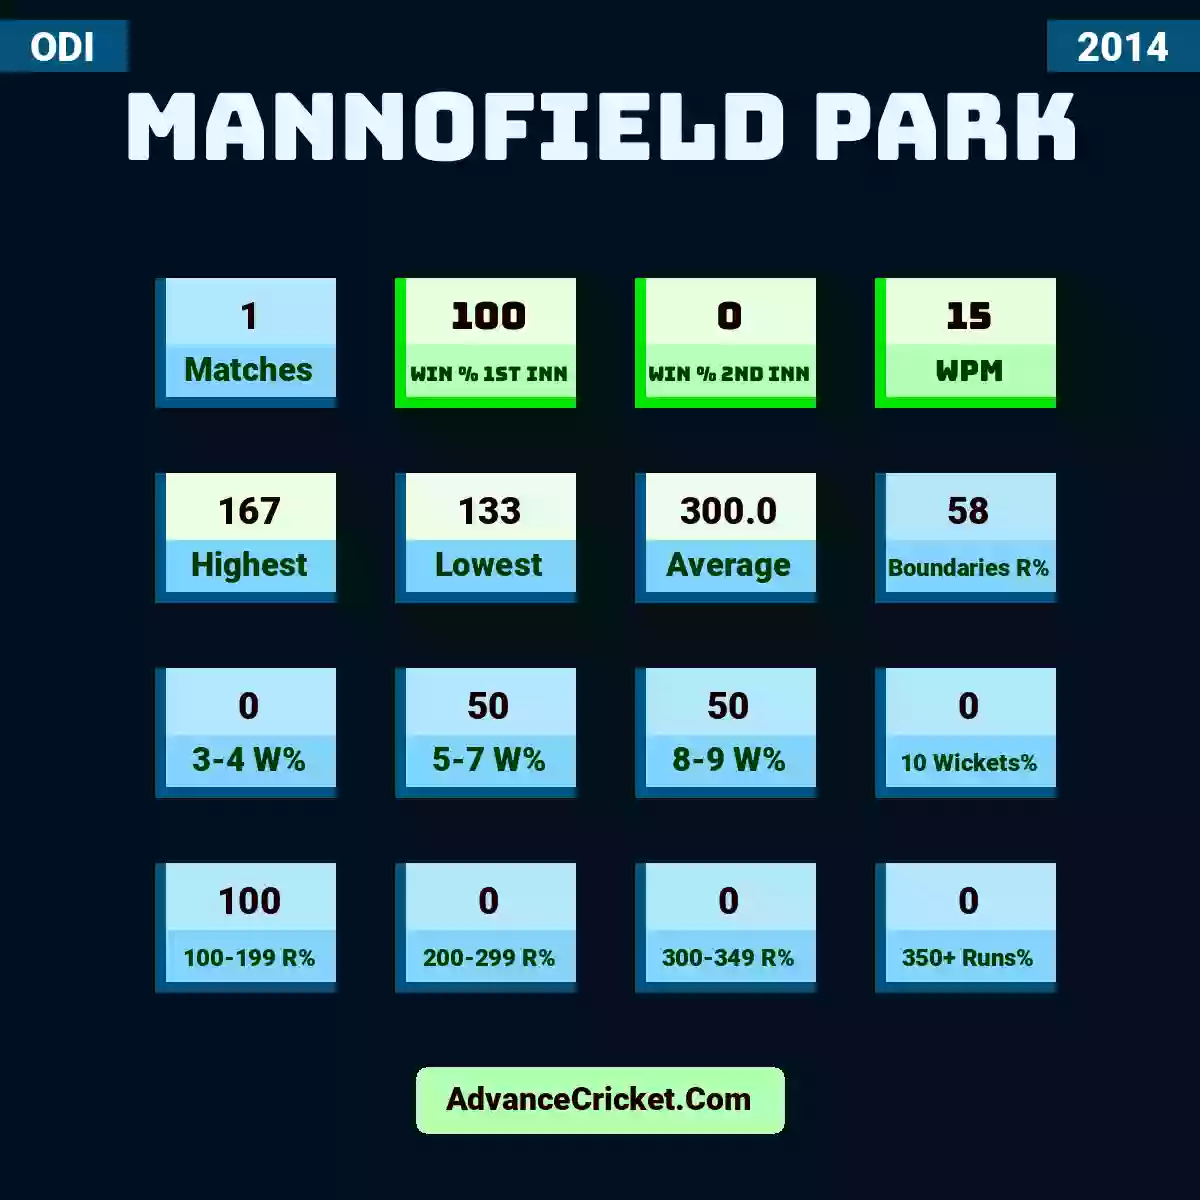 Image showing Mannofield Park with Matches: 1, Win % 1st Inn: 100, Win % 2nd Inn: 0, WPM: 15, Highest: 167, Lowest: 133, Average: 300.0, Boundaries R%: 58, 3-4 W%: 0, 5-7 W%: 50, 8-9 W%: 50, 10 Wickets%: 0, 100-199 R%: 100, 200-299 R%: 0, 300-349 R%: 0, 350+ Runs%: 0.